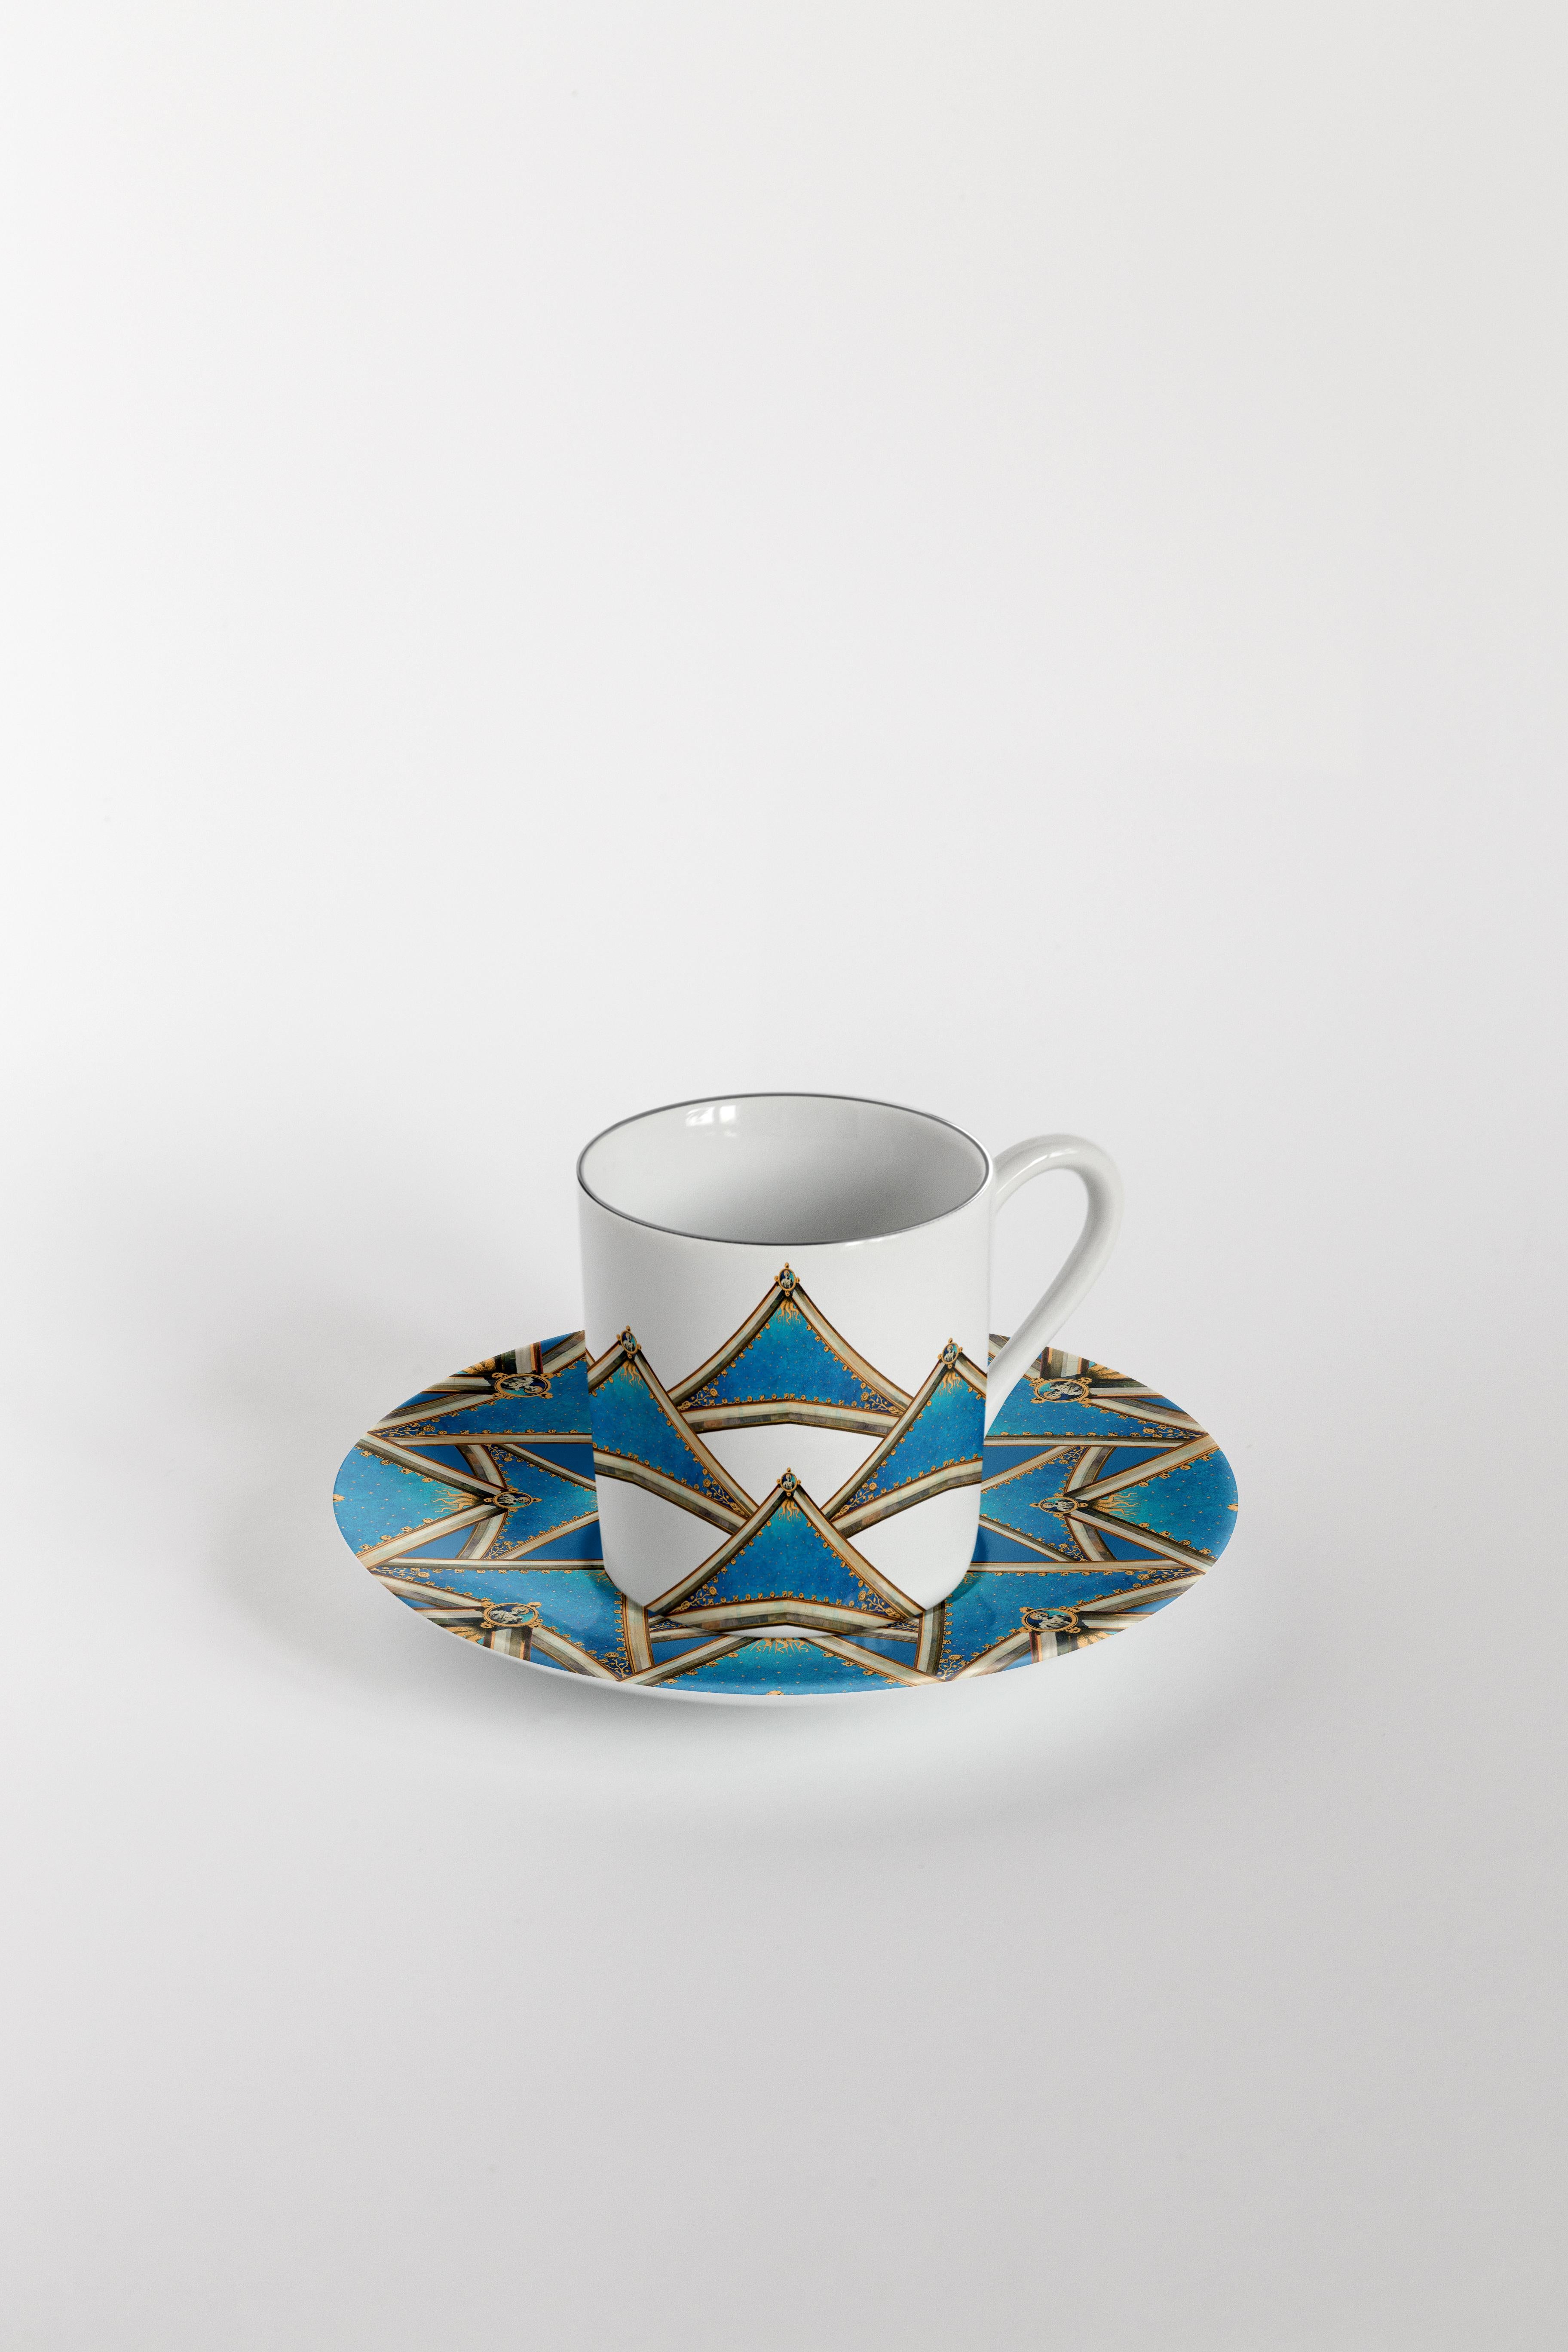 Italian Le Volte Celesti, Six Contemporary Decorated Coffee Cups with Plates For Sale